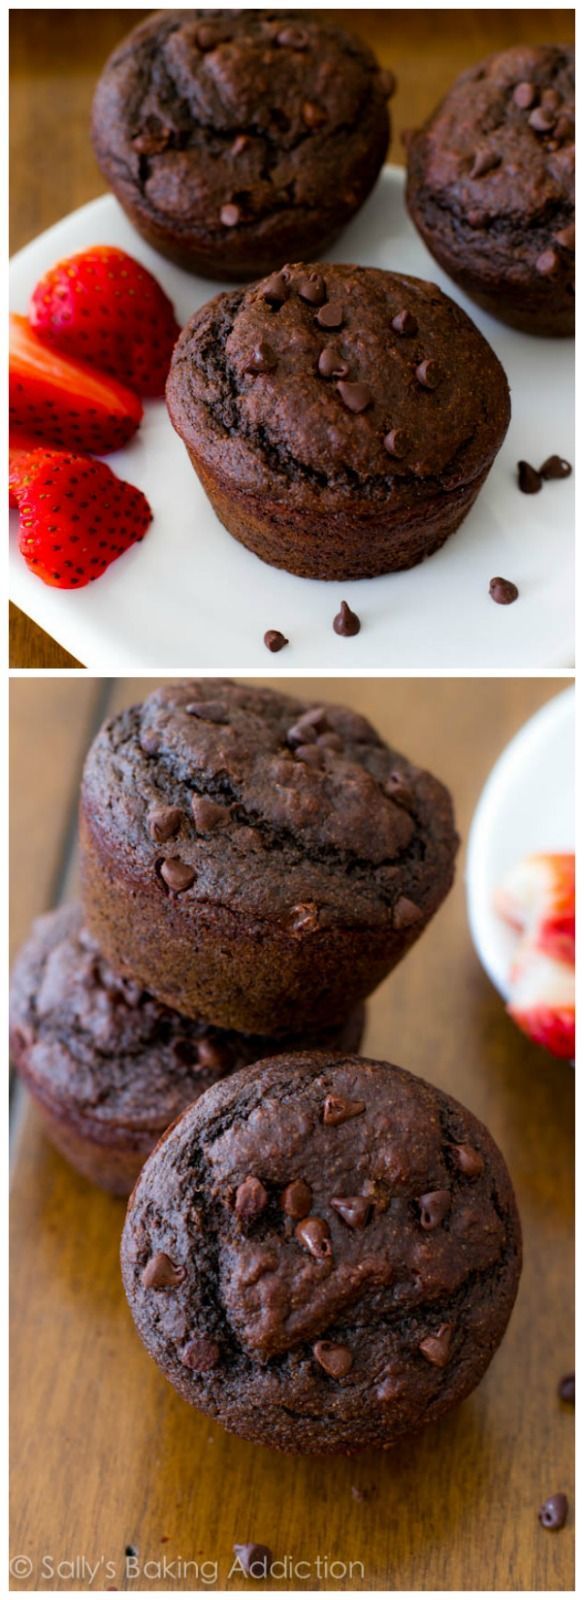 I make these Low Fat, Skinny Double Chocolate Muffins whenever I have a chocolate craving. Which is often!